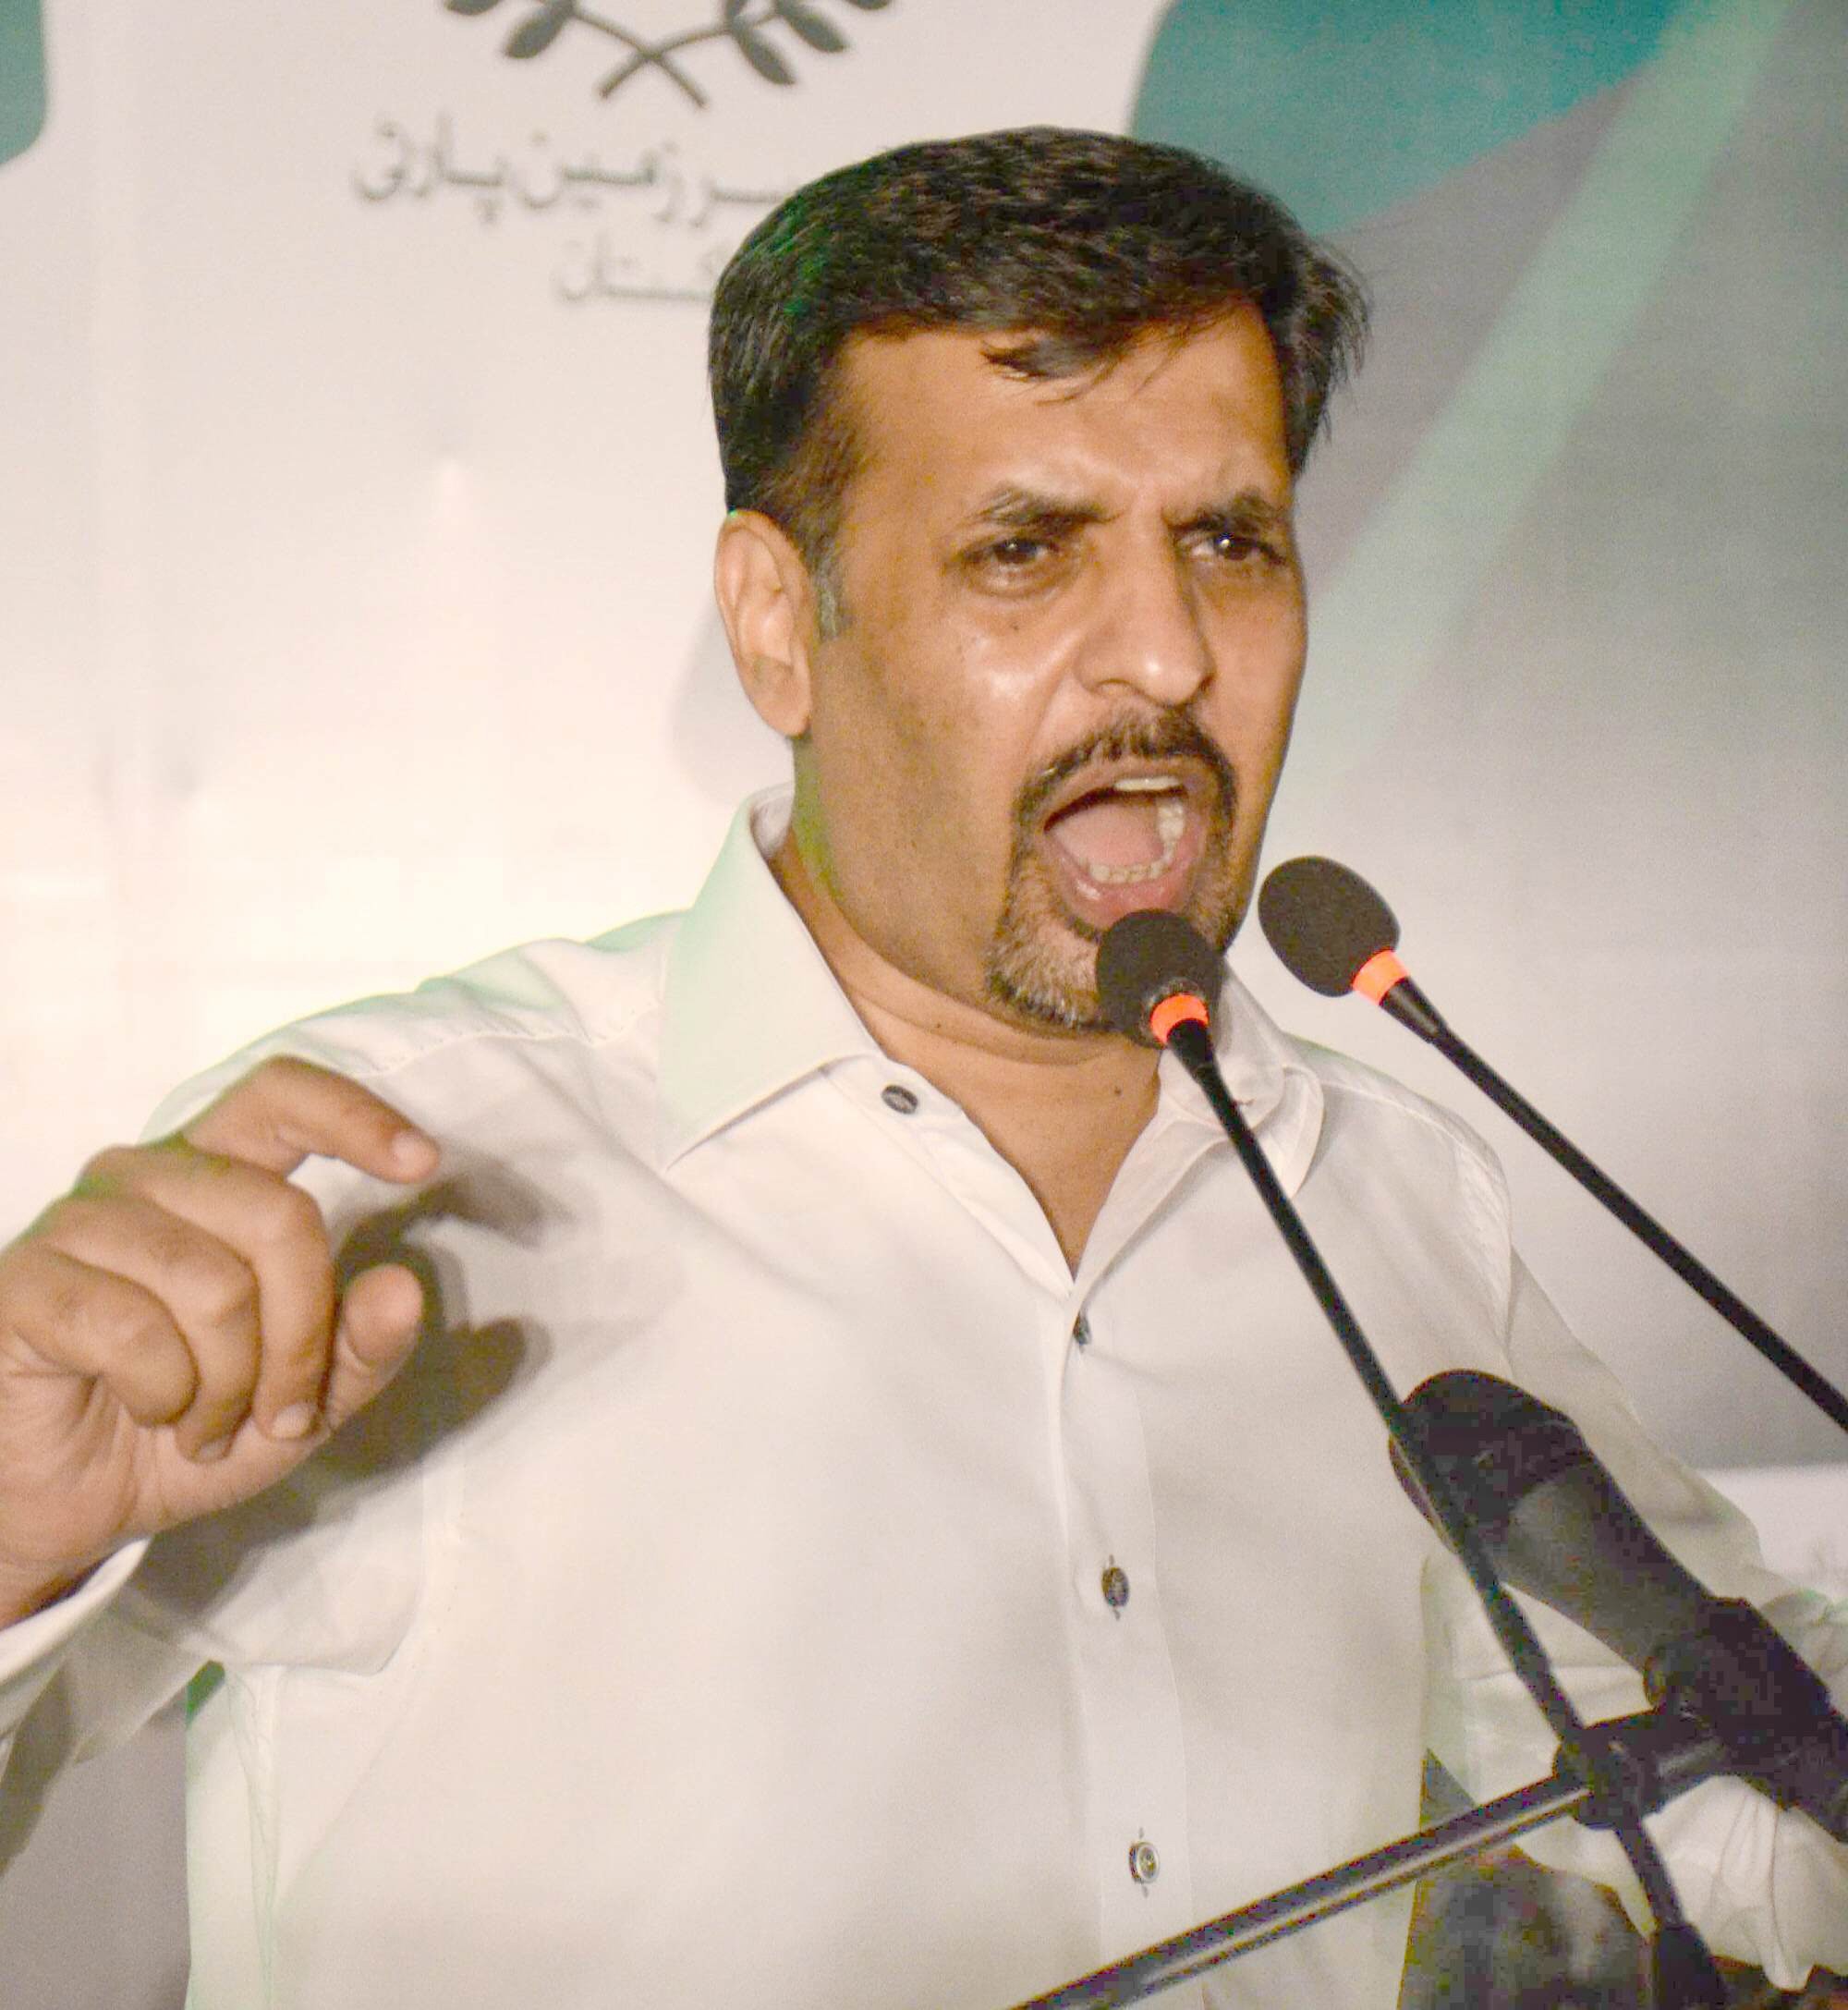 psp chief wants emergency declared in city